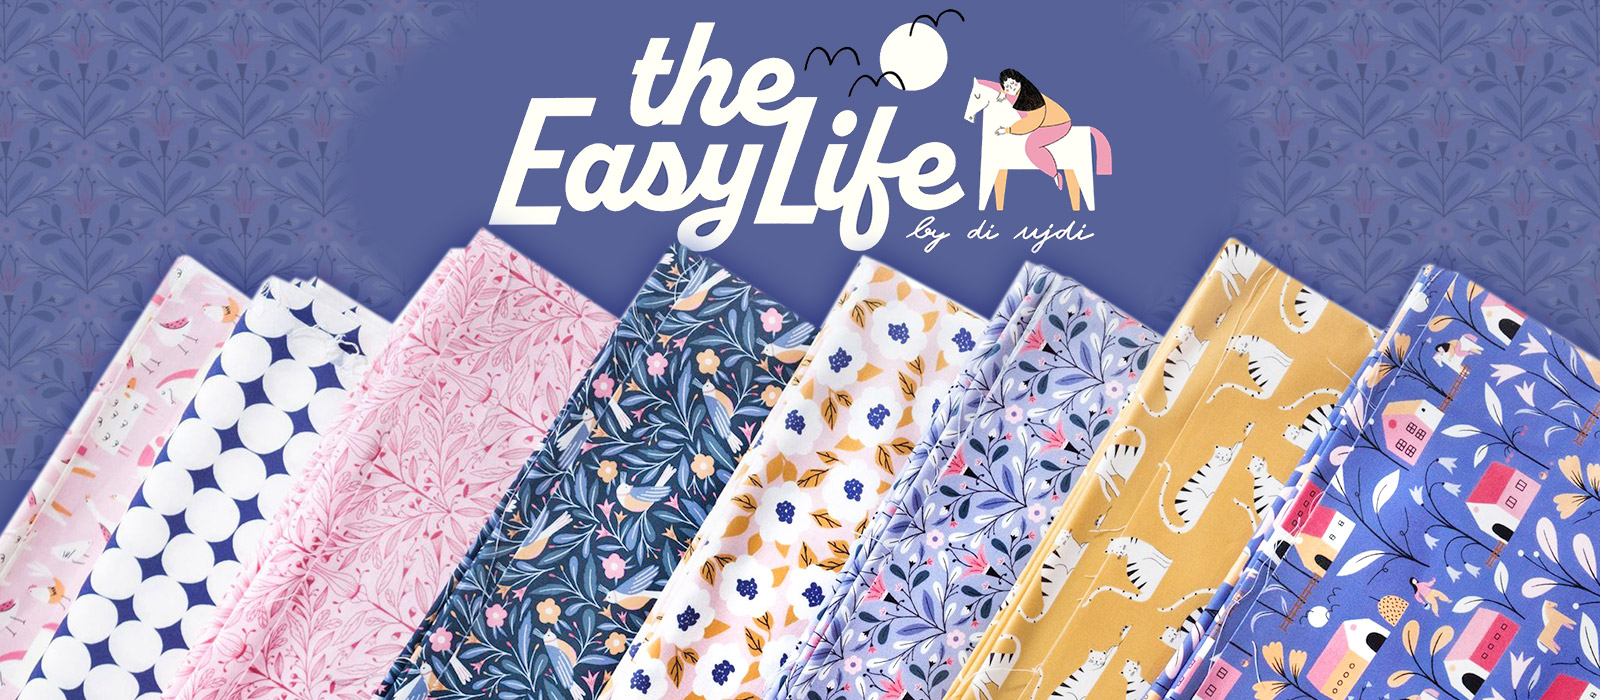 Cloud9 Fabrics The Easy Life Collection by Di Ujdi